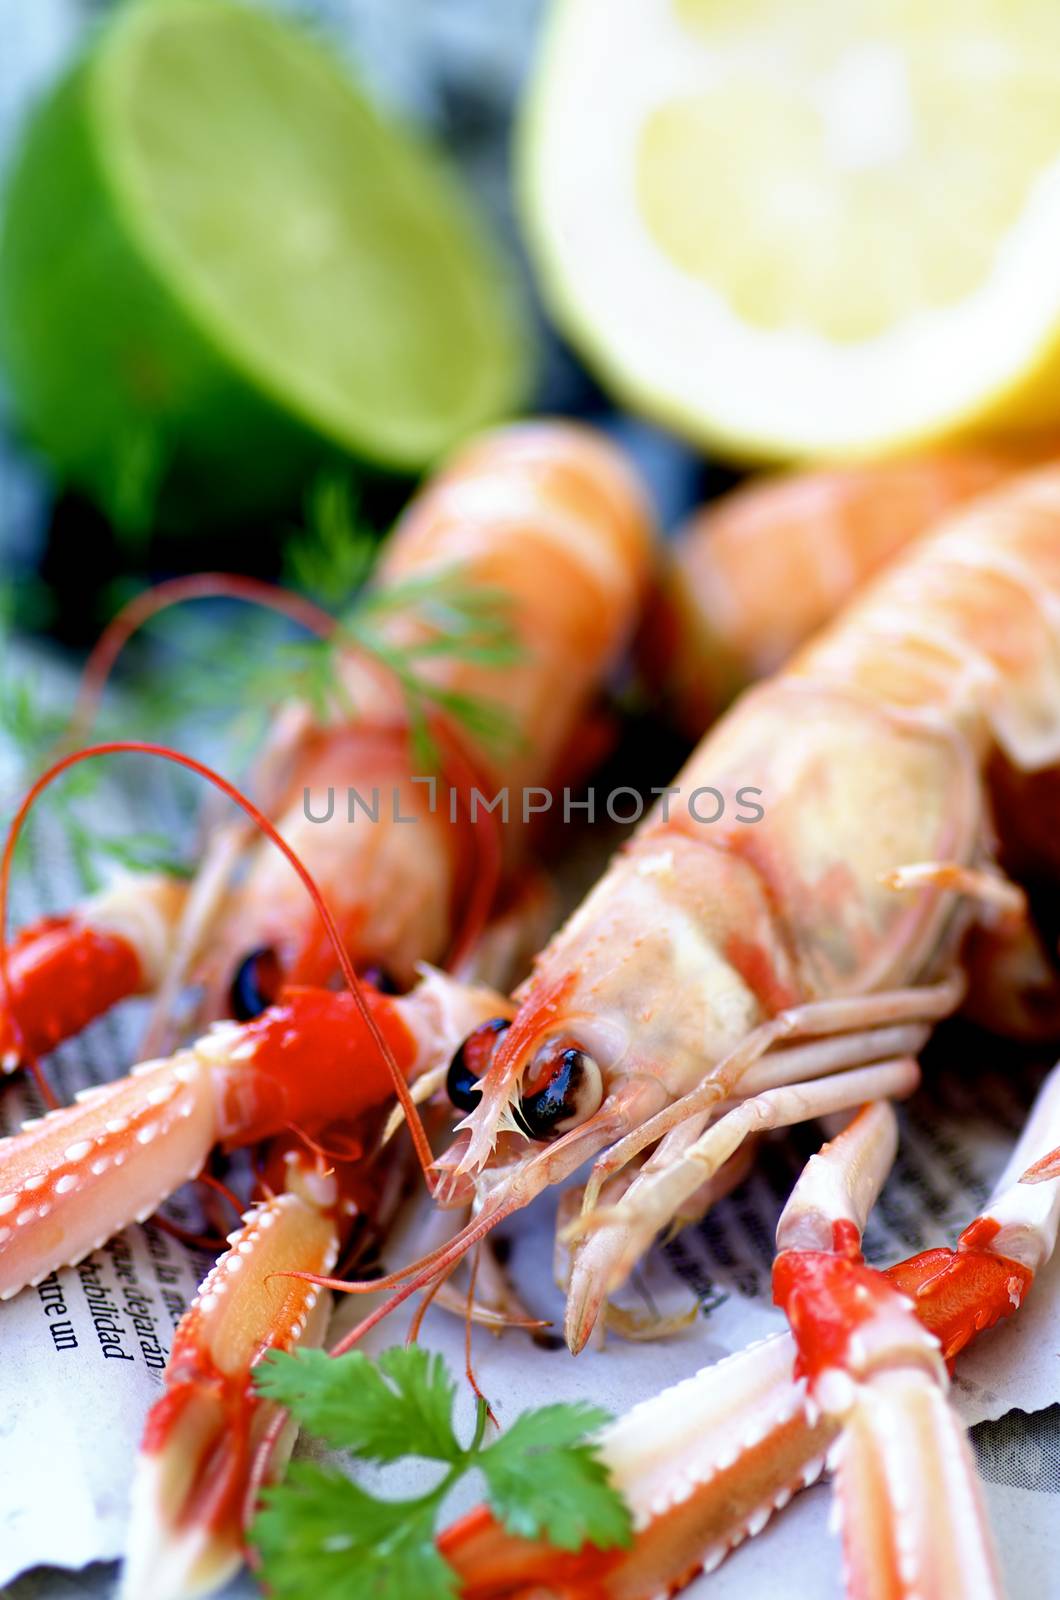 Two Delicious Raw Langoustines with Parsley and Dill closeup on Newspaper. Focus on Animal Eye